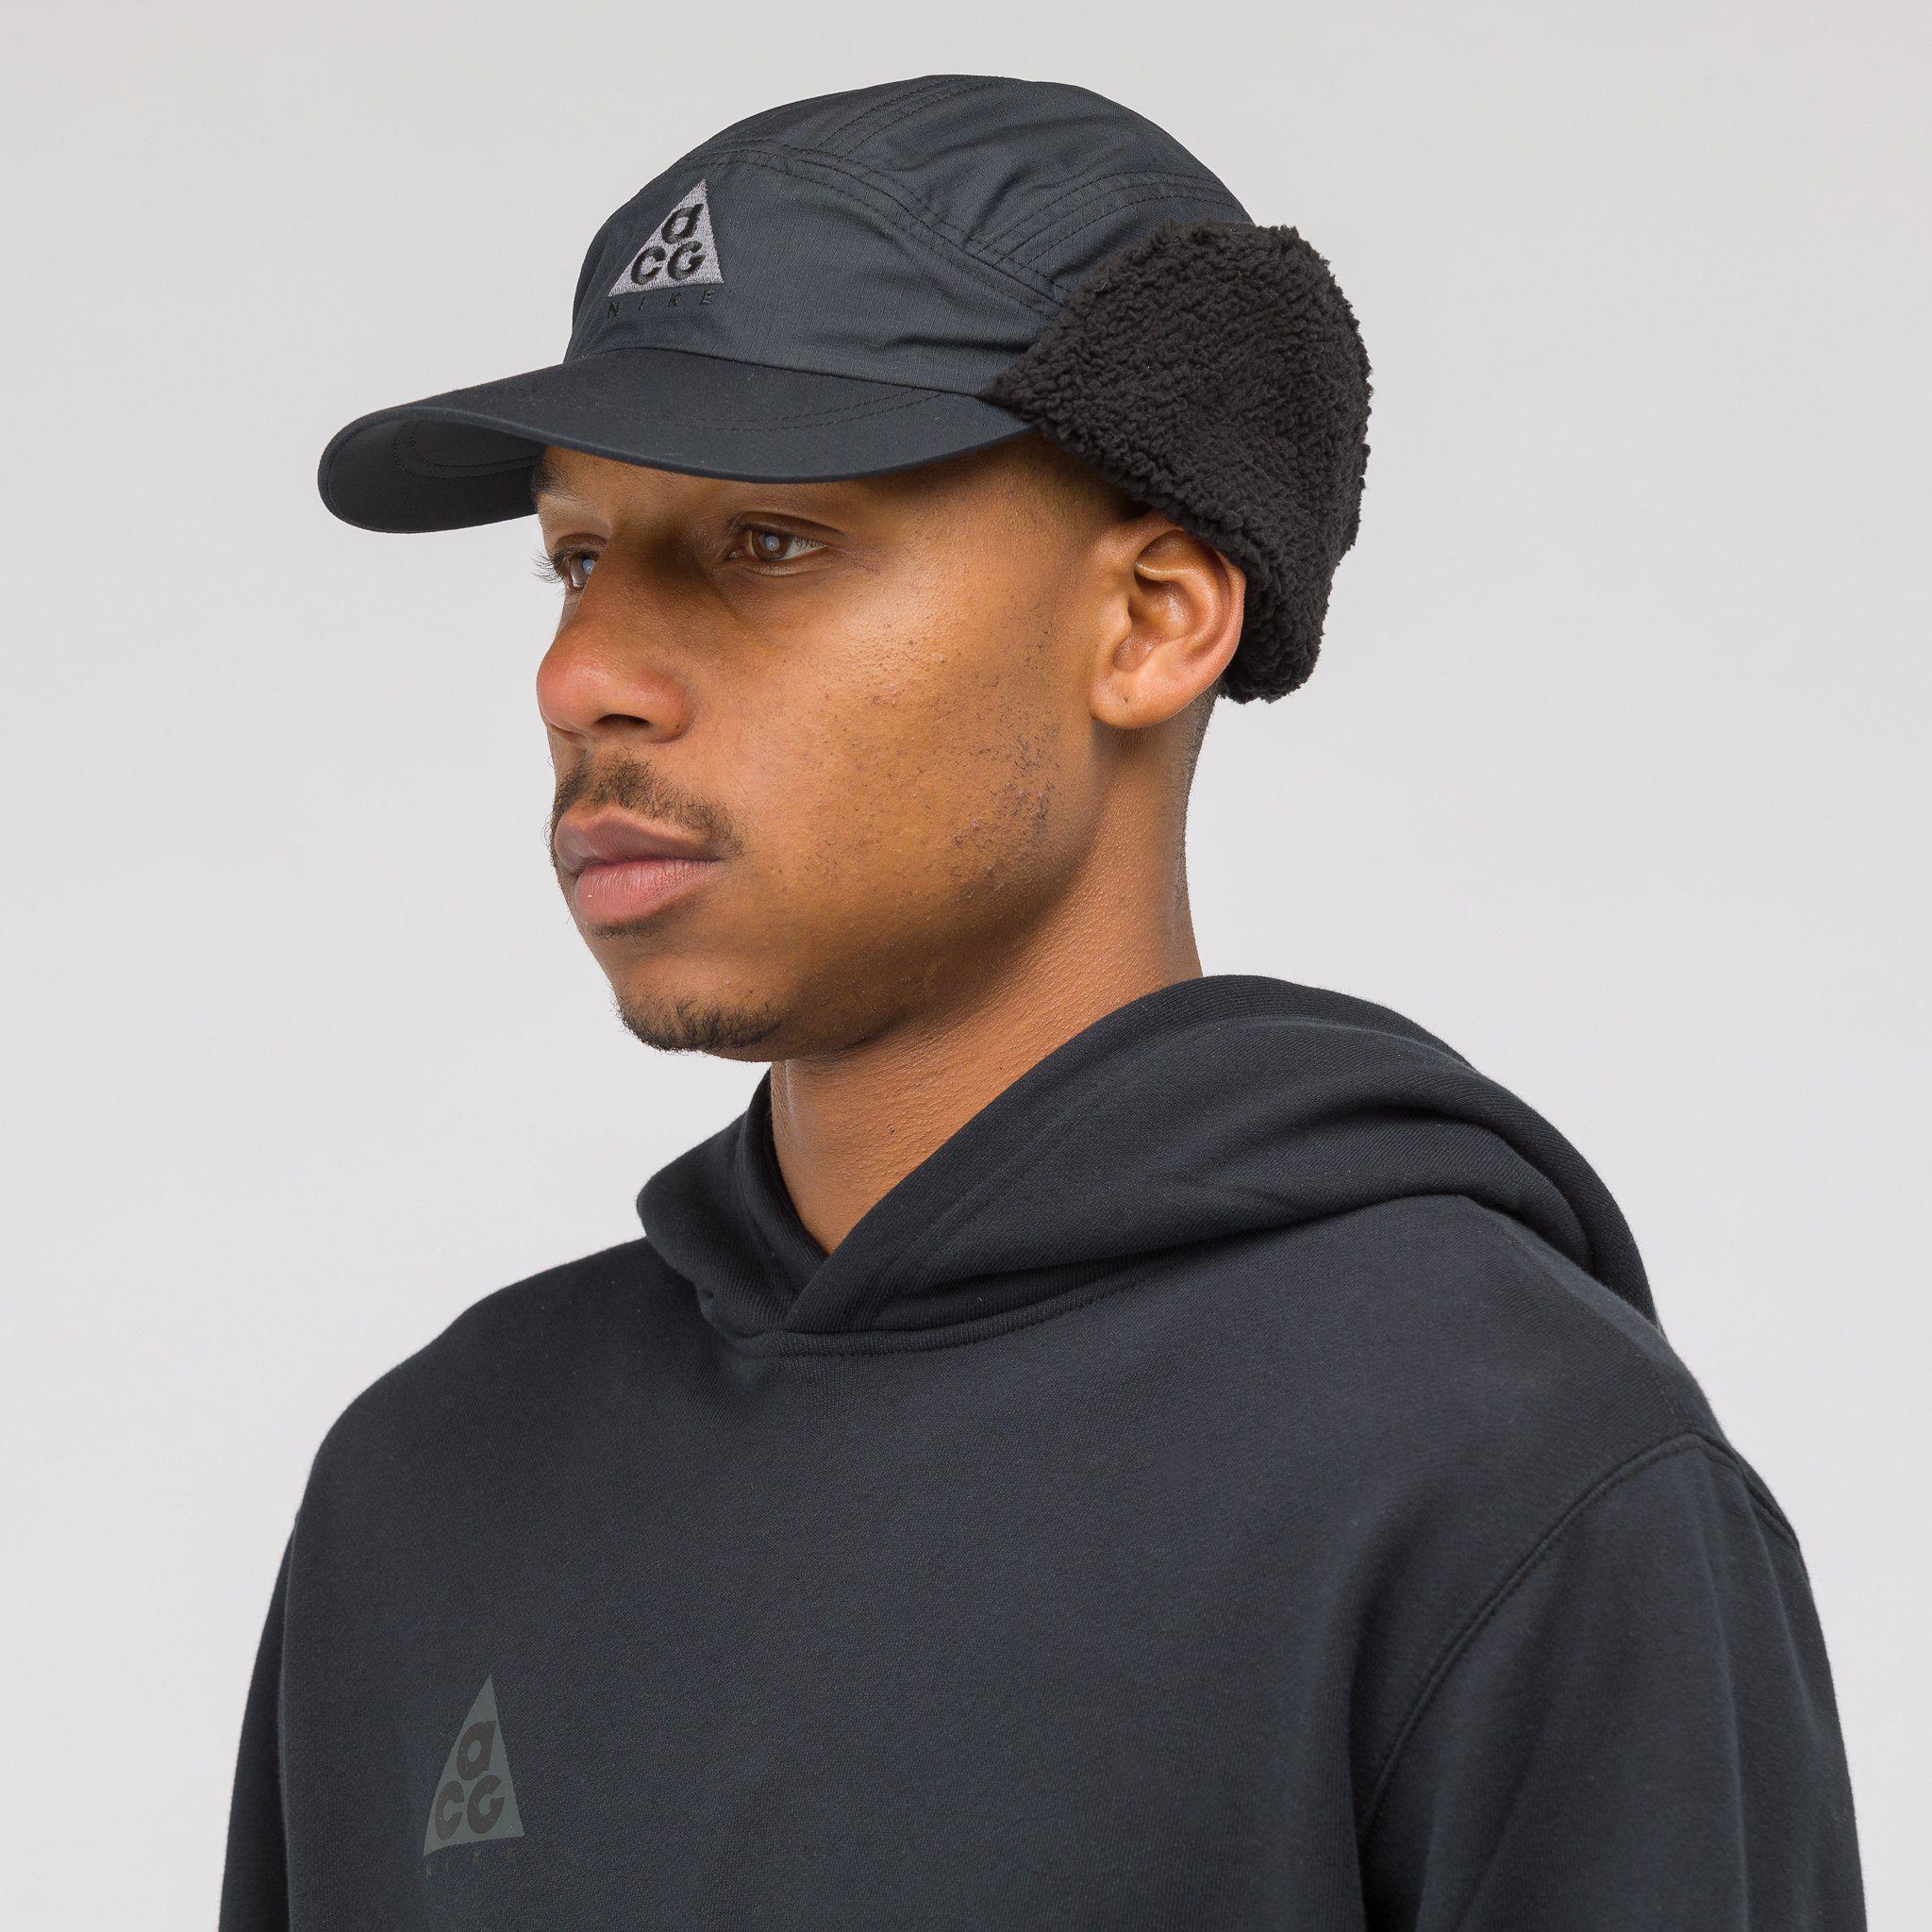 nike cap with ear flaps